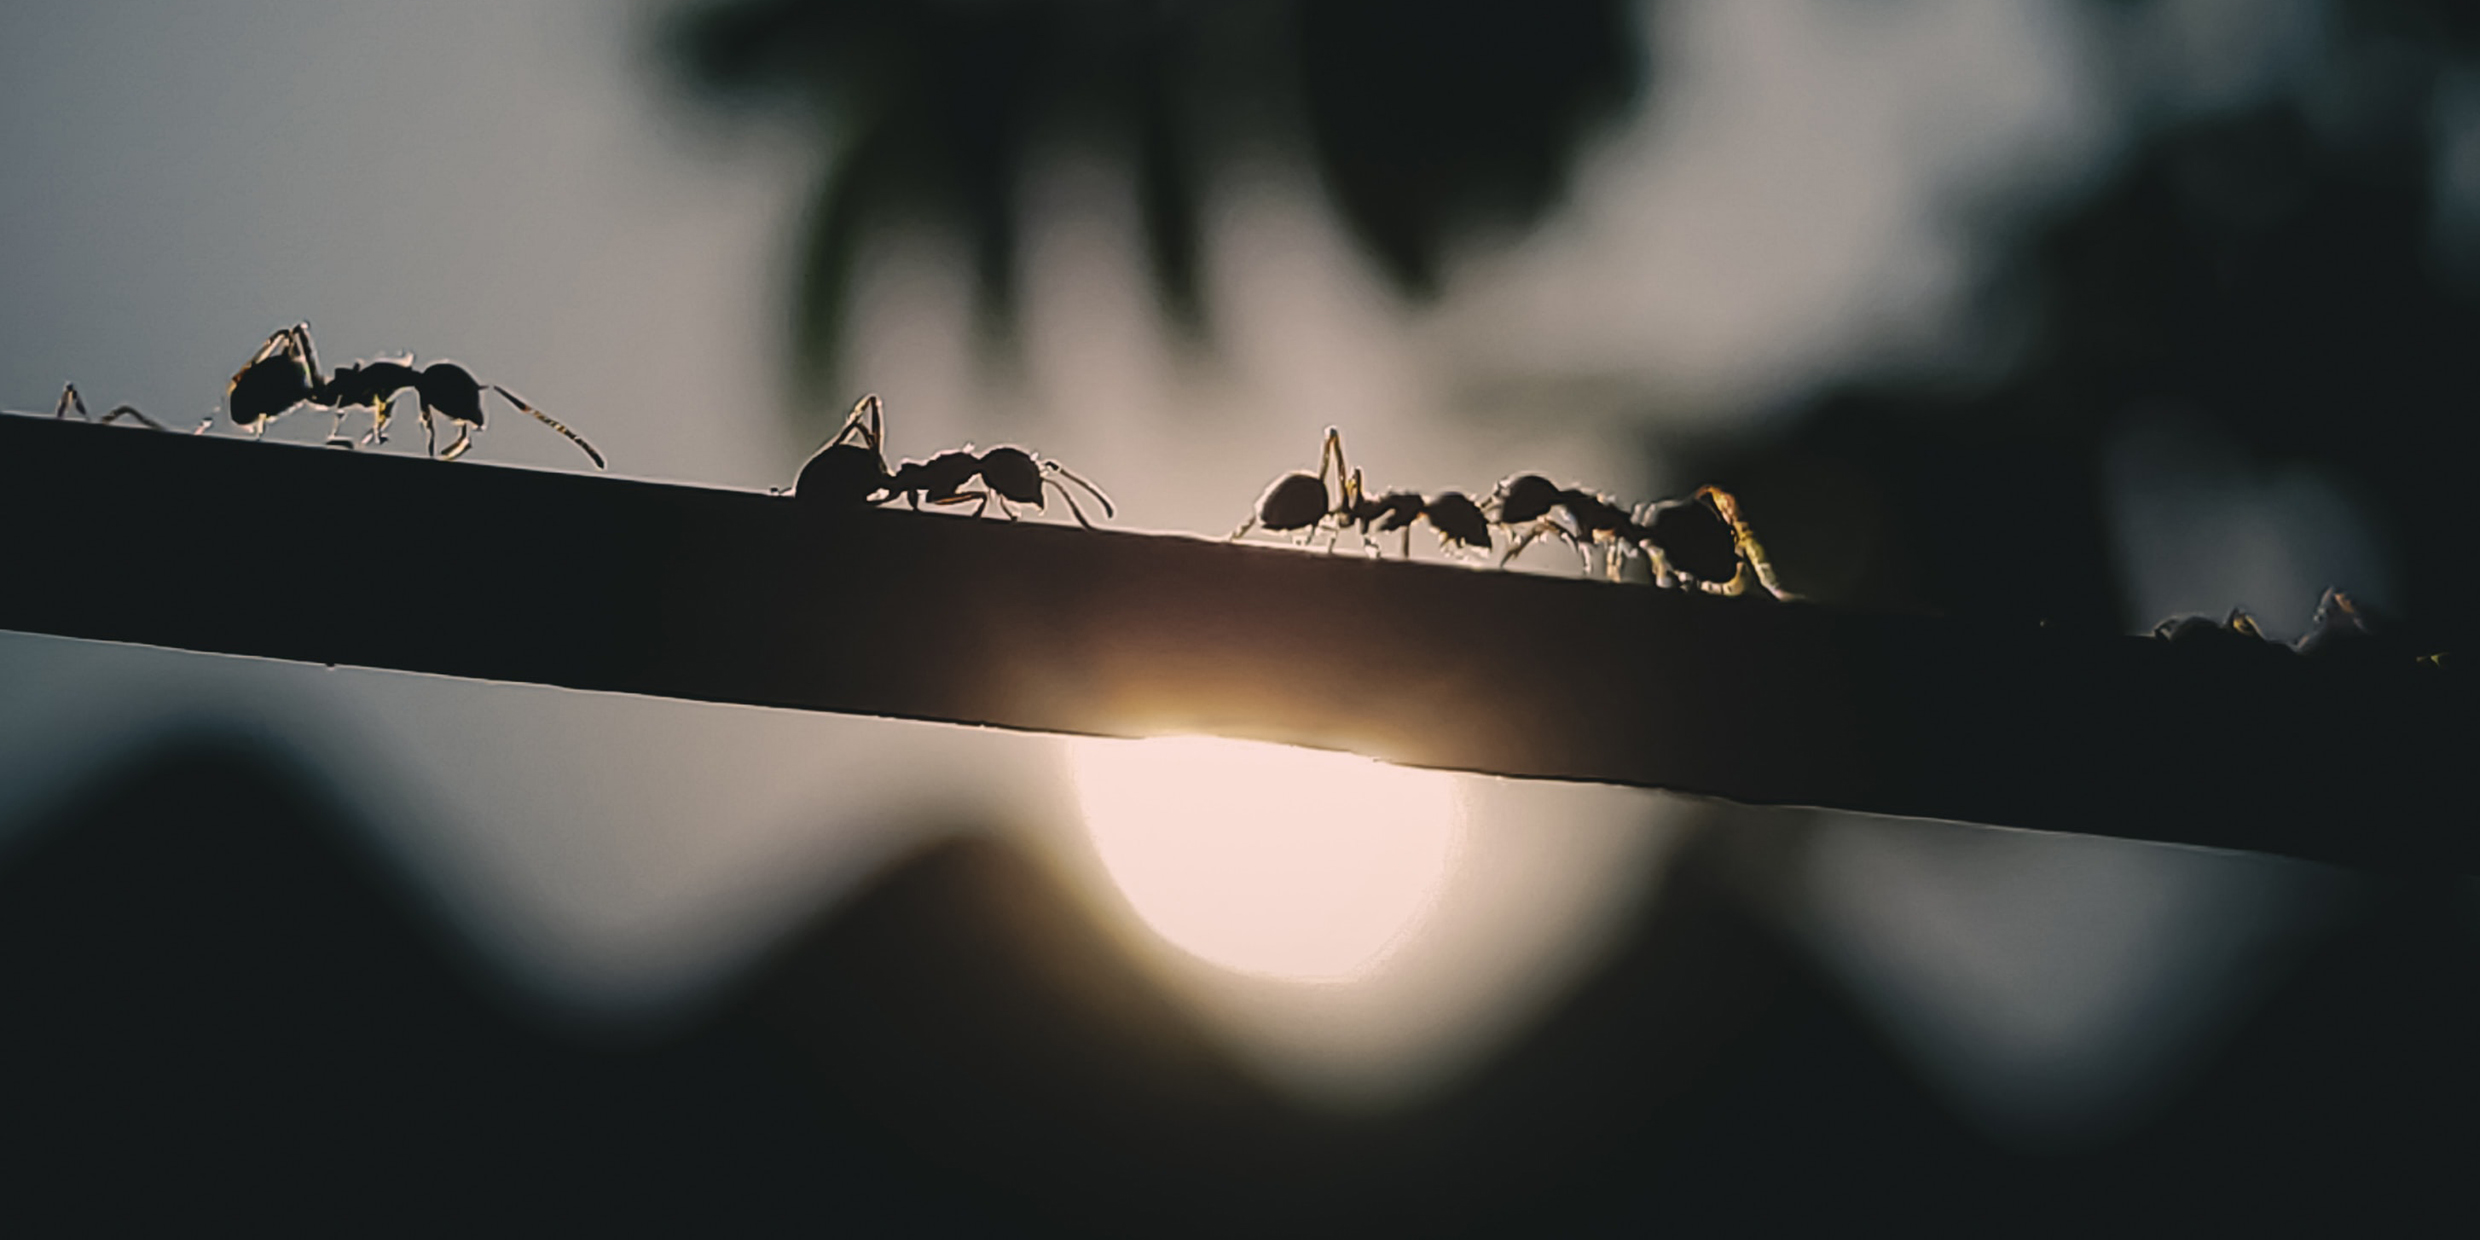 Image of a line of ants silhouetted by sunlight